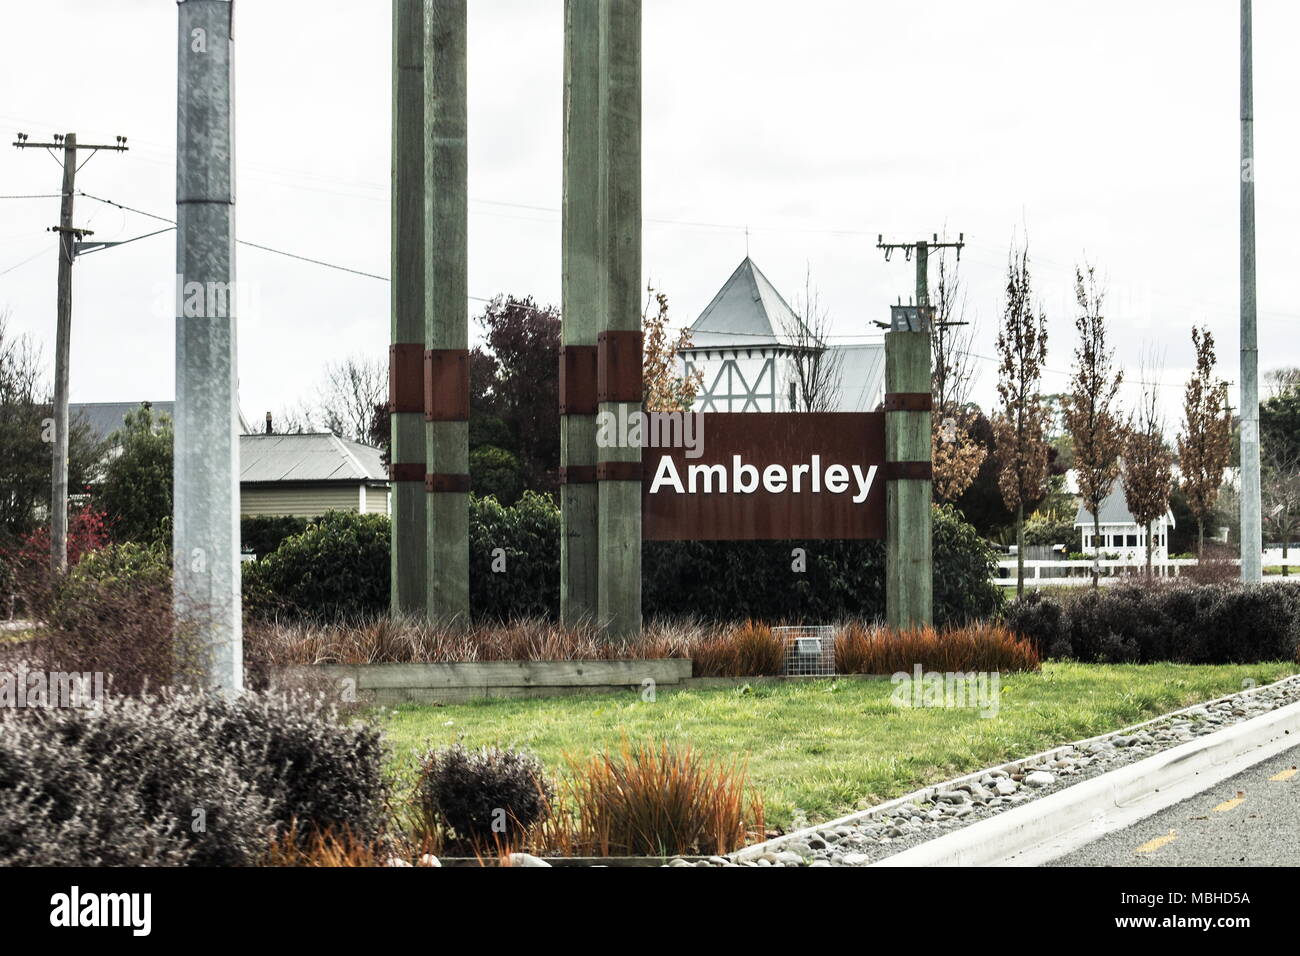 Amberley is a town located in the Hurunui District in north Canterbury, on the east coast of the South Island of New Zealand. Stock Photo